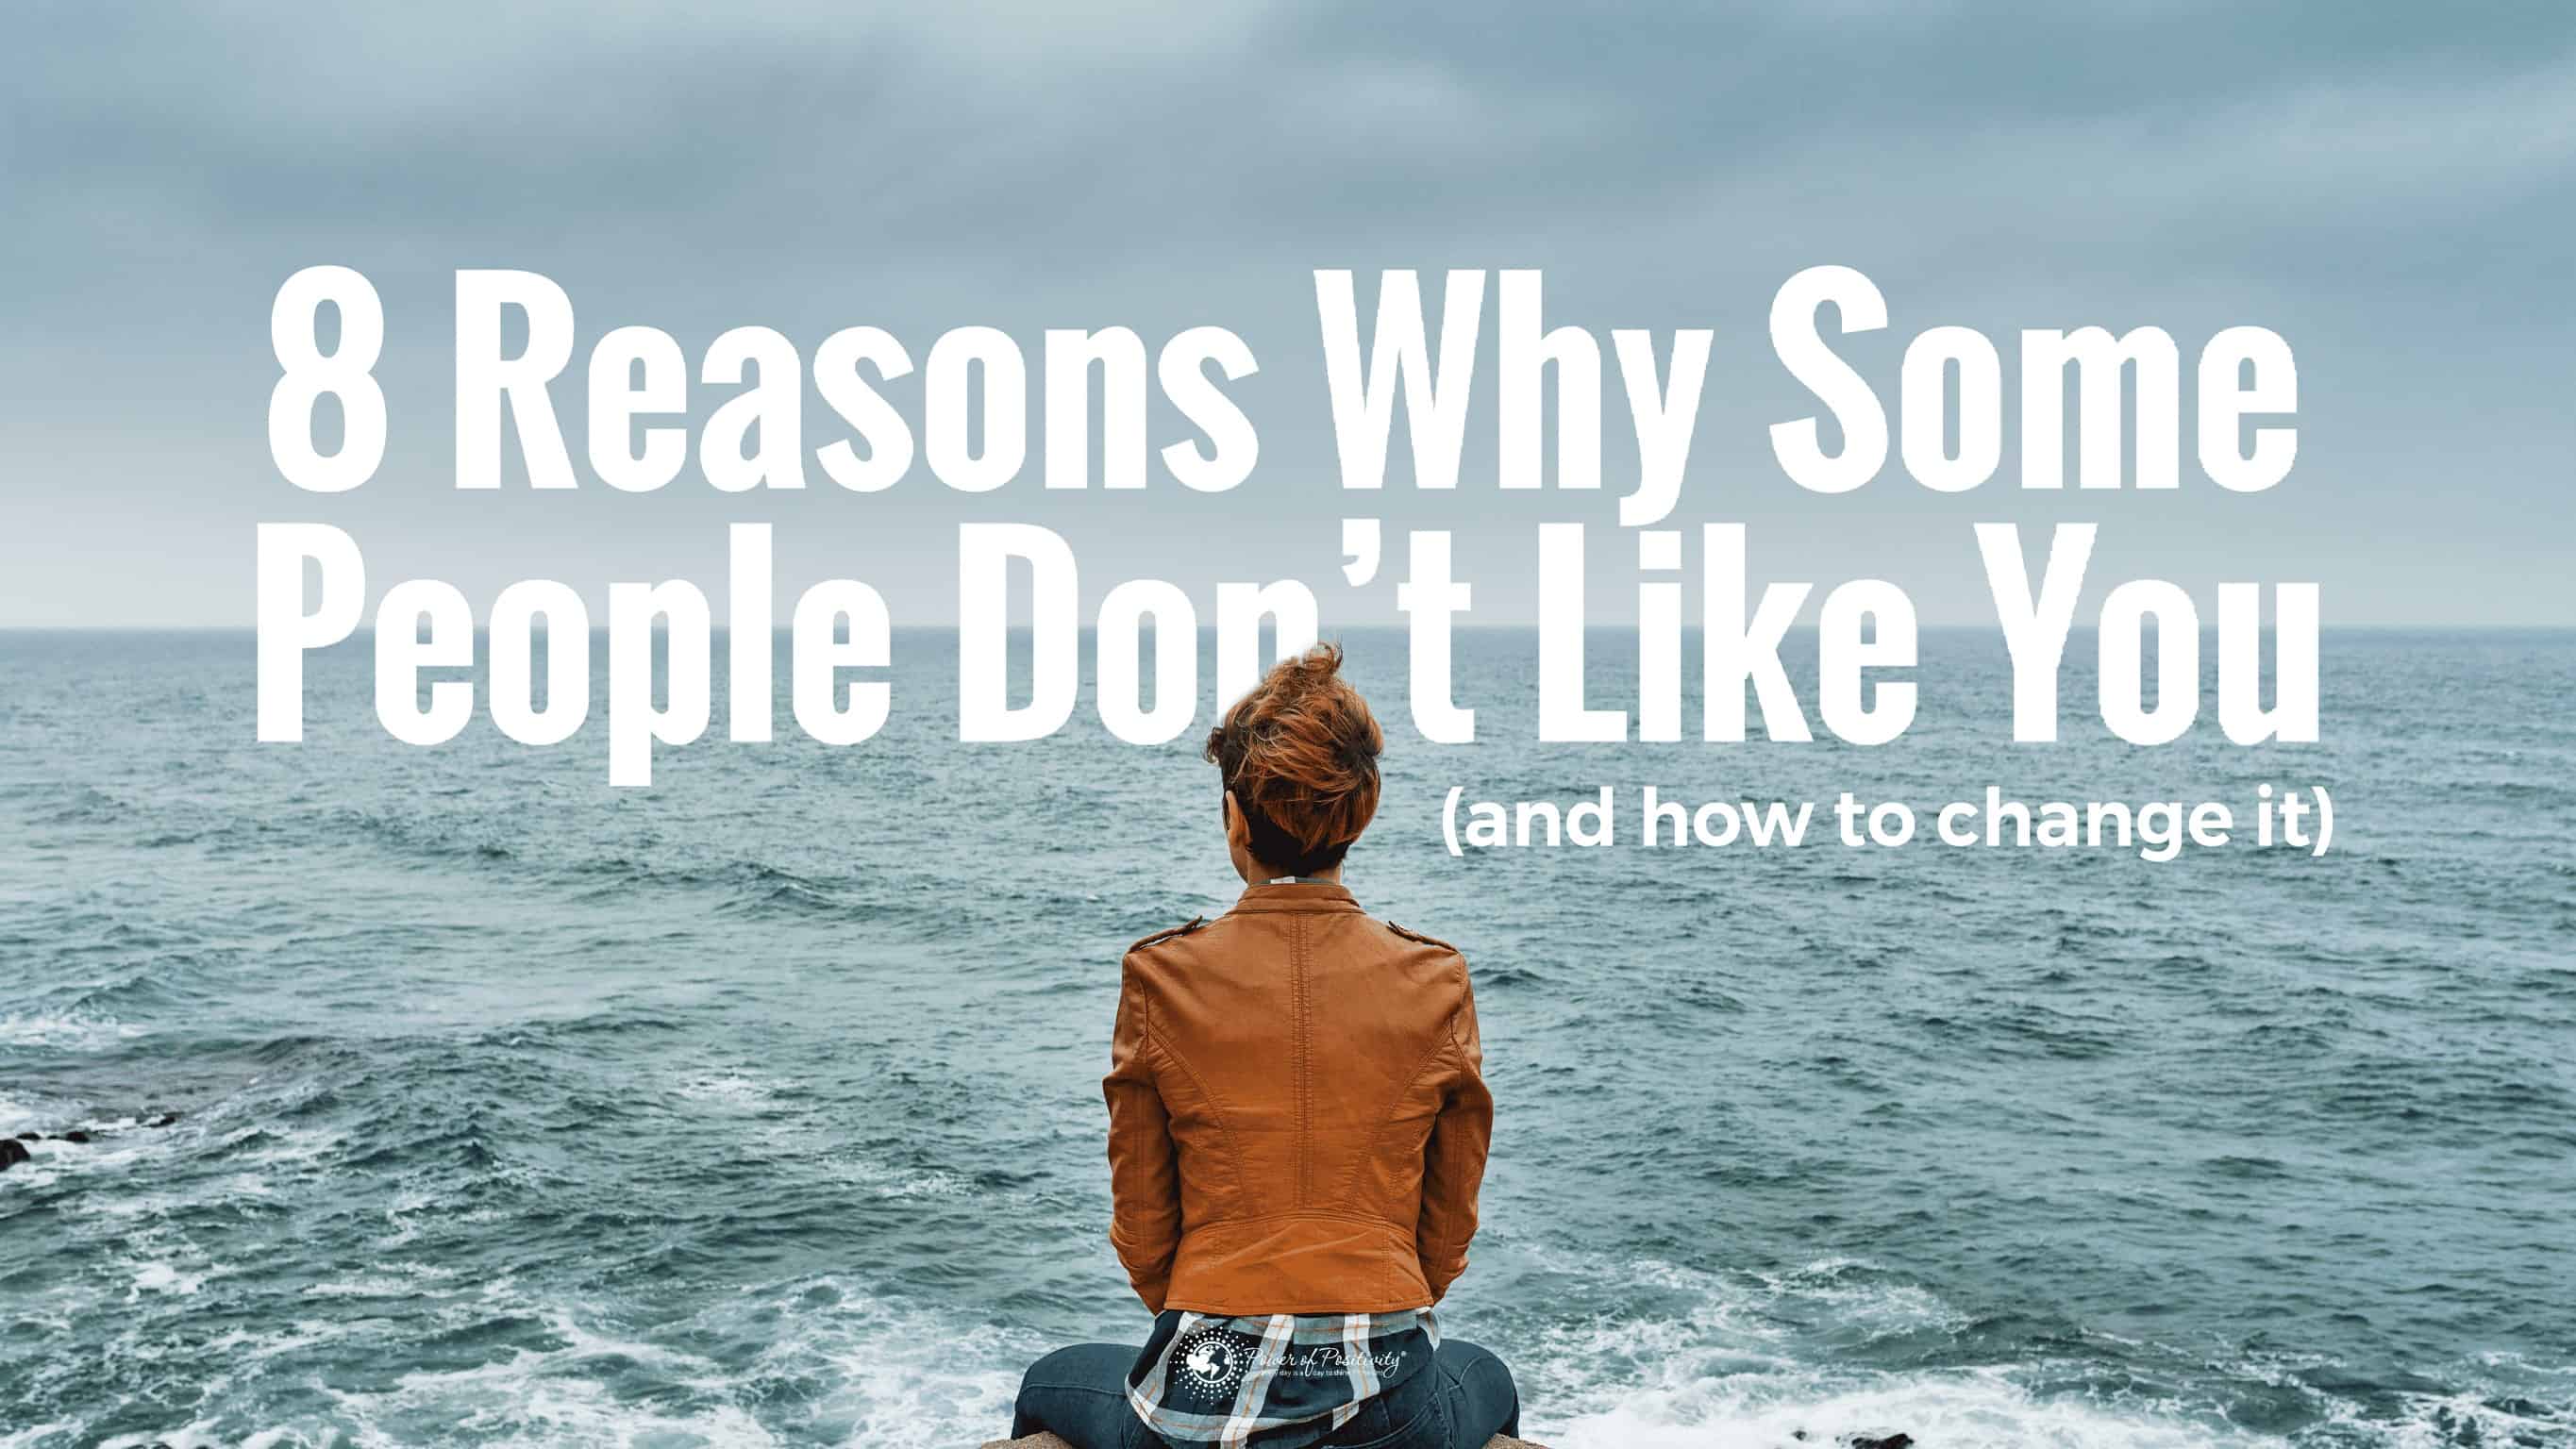 8 Reasons Some People Don’t Like You (And How to Change It)